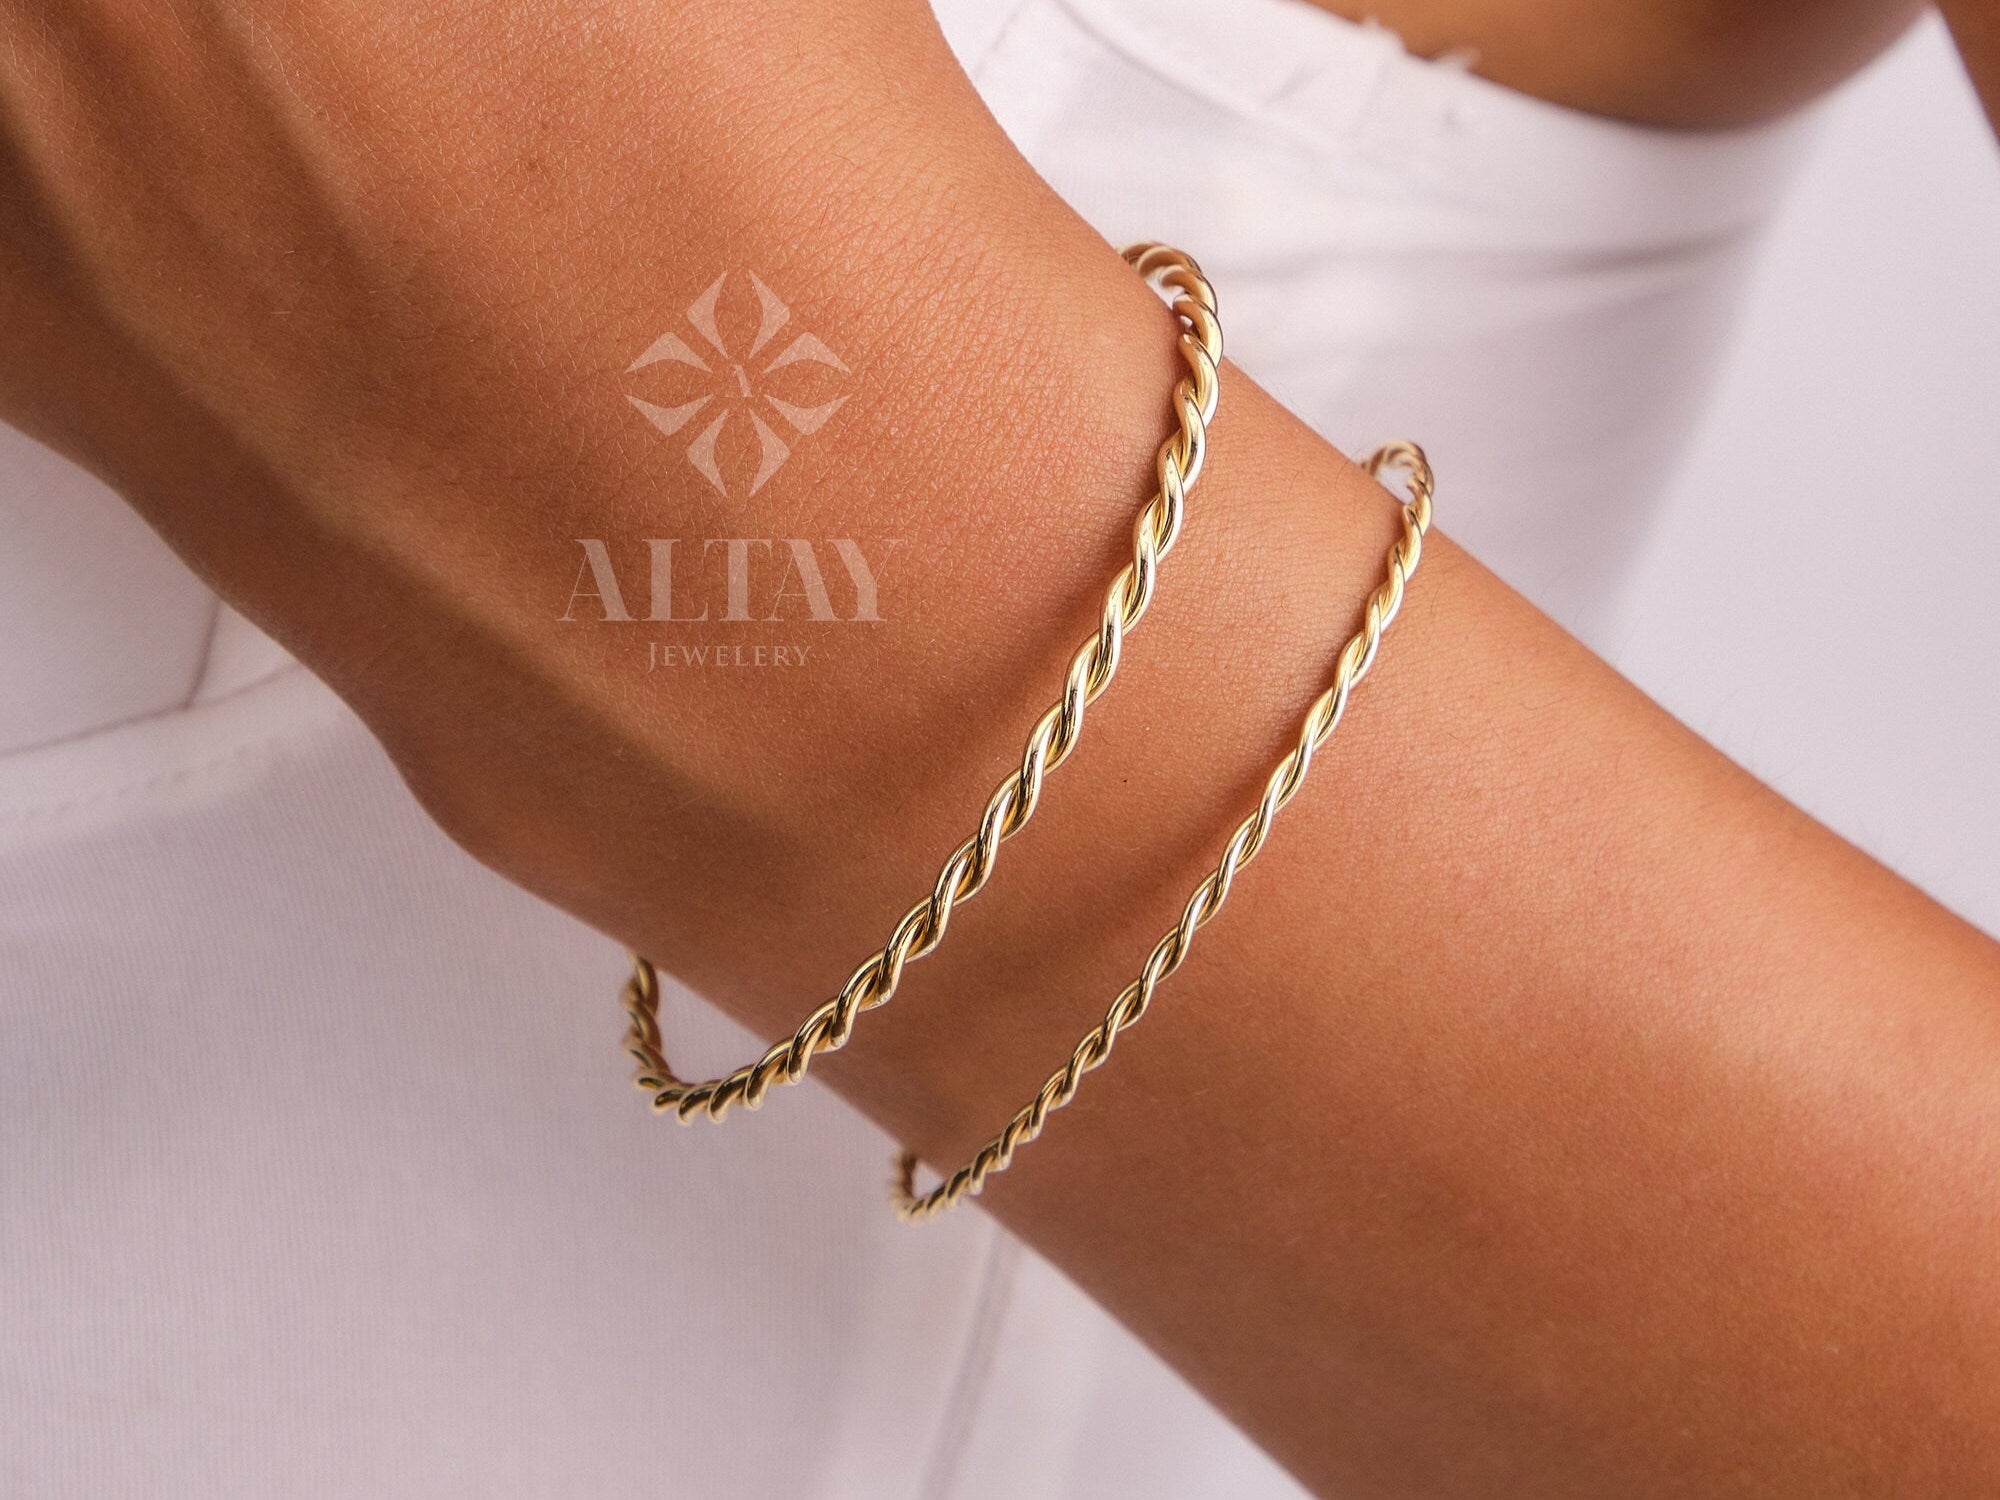 14K Gold Rope Bangle, Twisted Adjustable Gold Bangle, 2.75mm 1.95mm Wide Bracelet, Personalized Evil Eye Extender, Wire Stacking Cuff